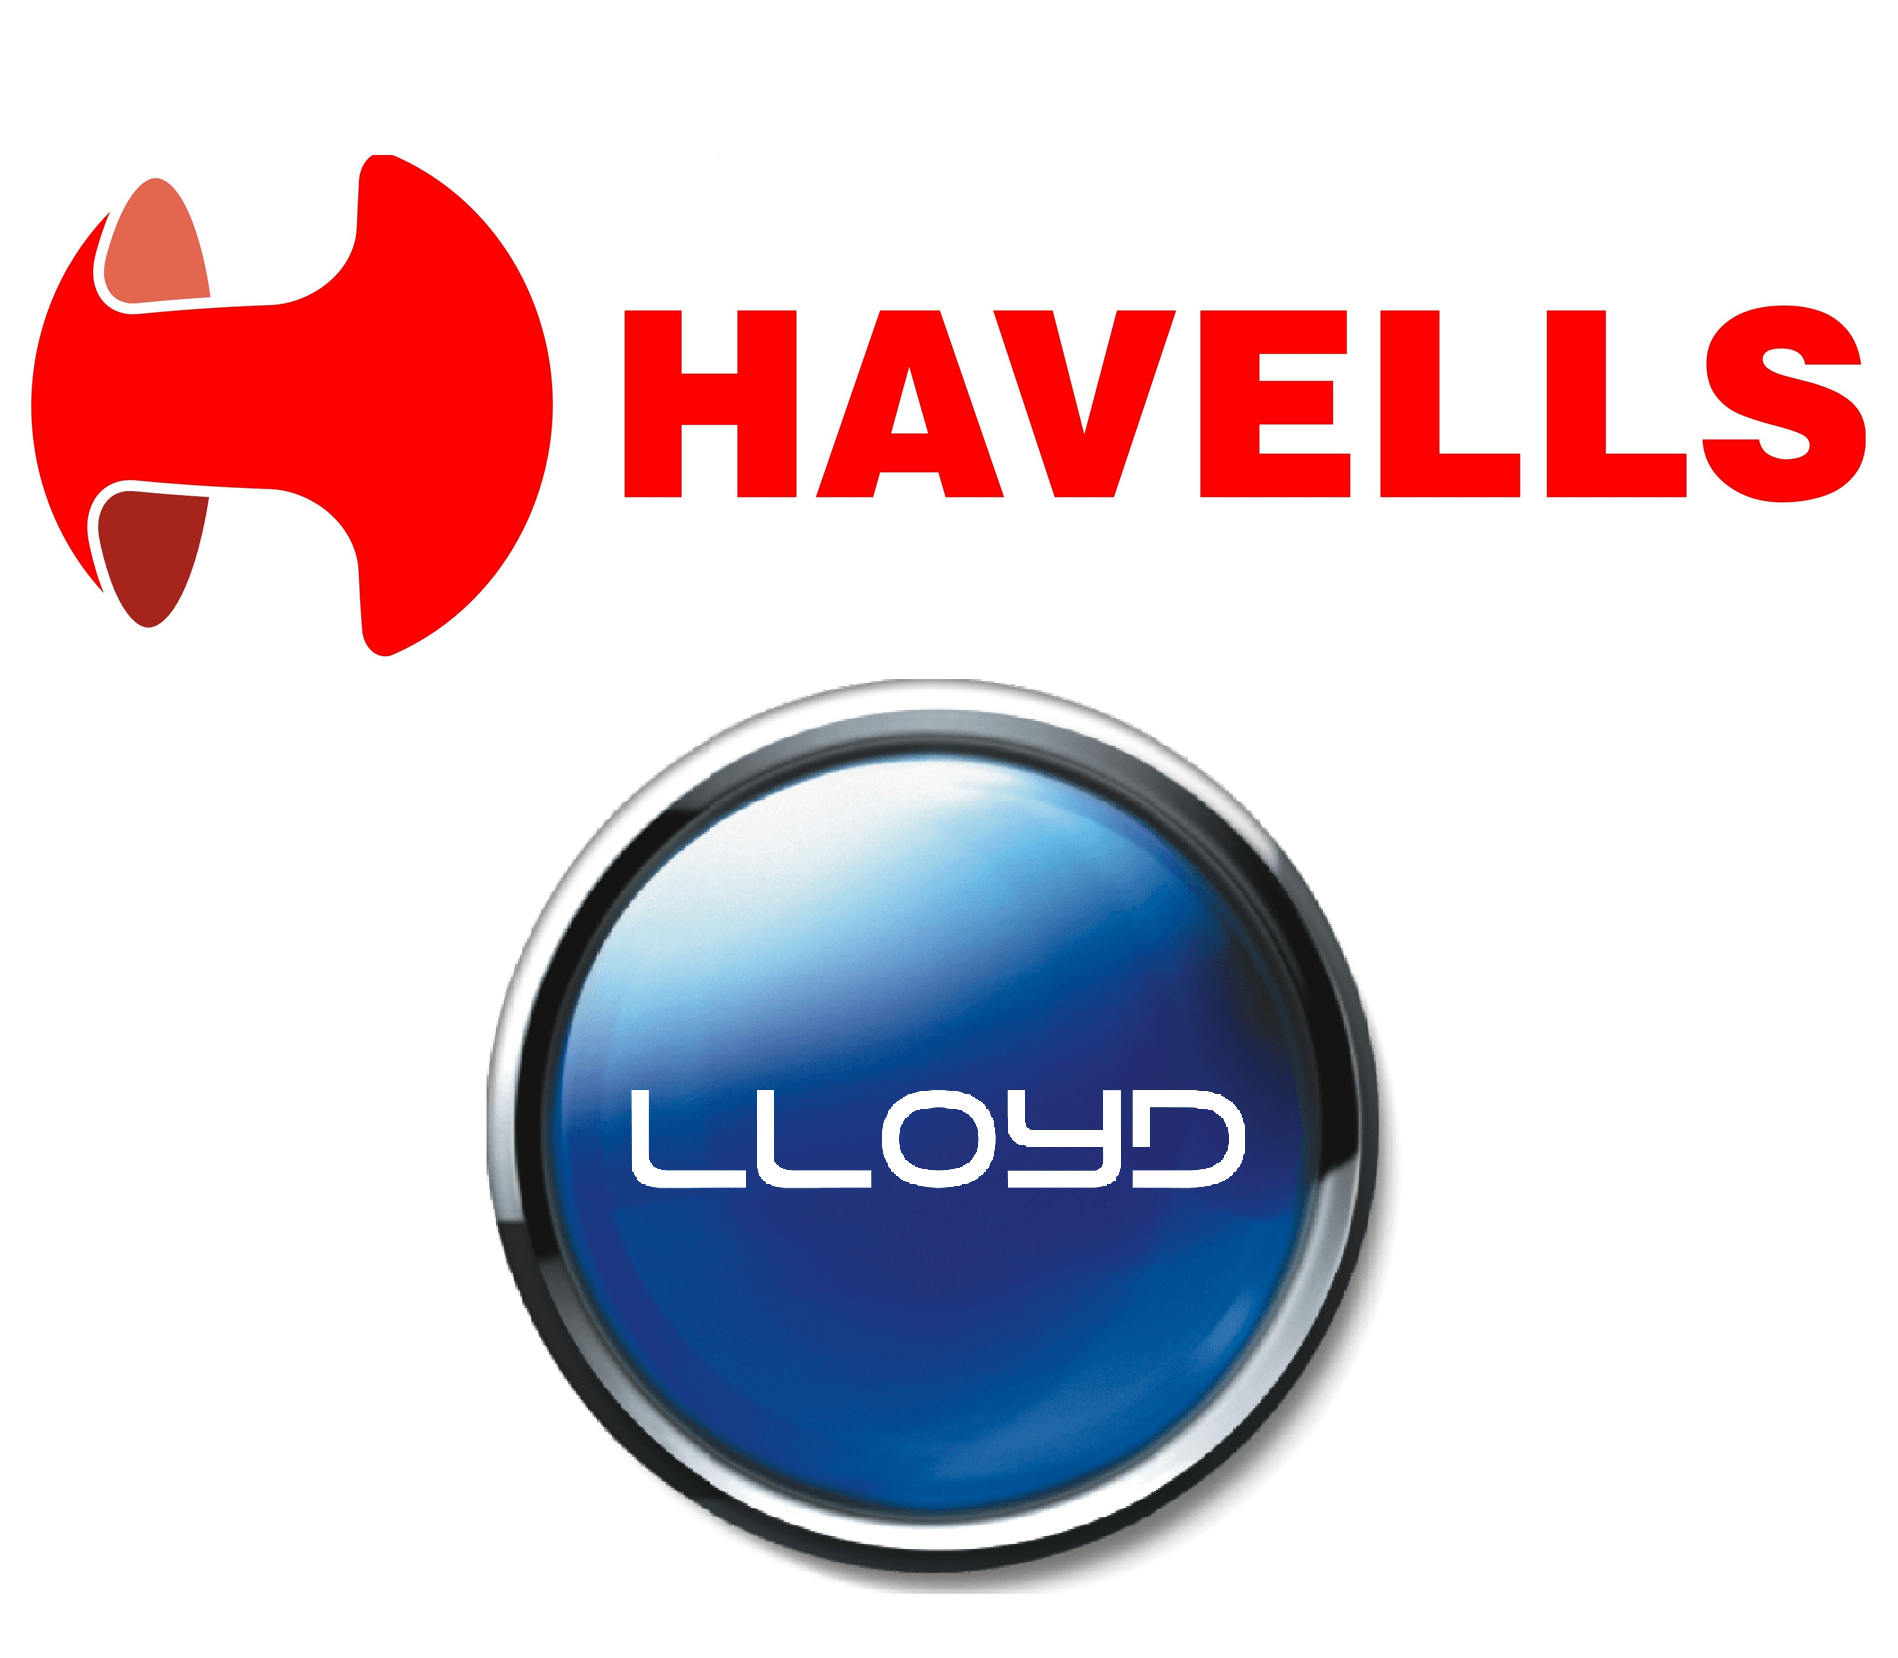 Havells Logo - Havells Acquires Consumer Durables Business of Lloyd Electric